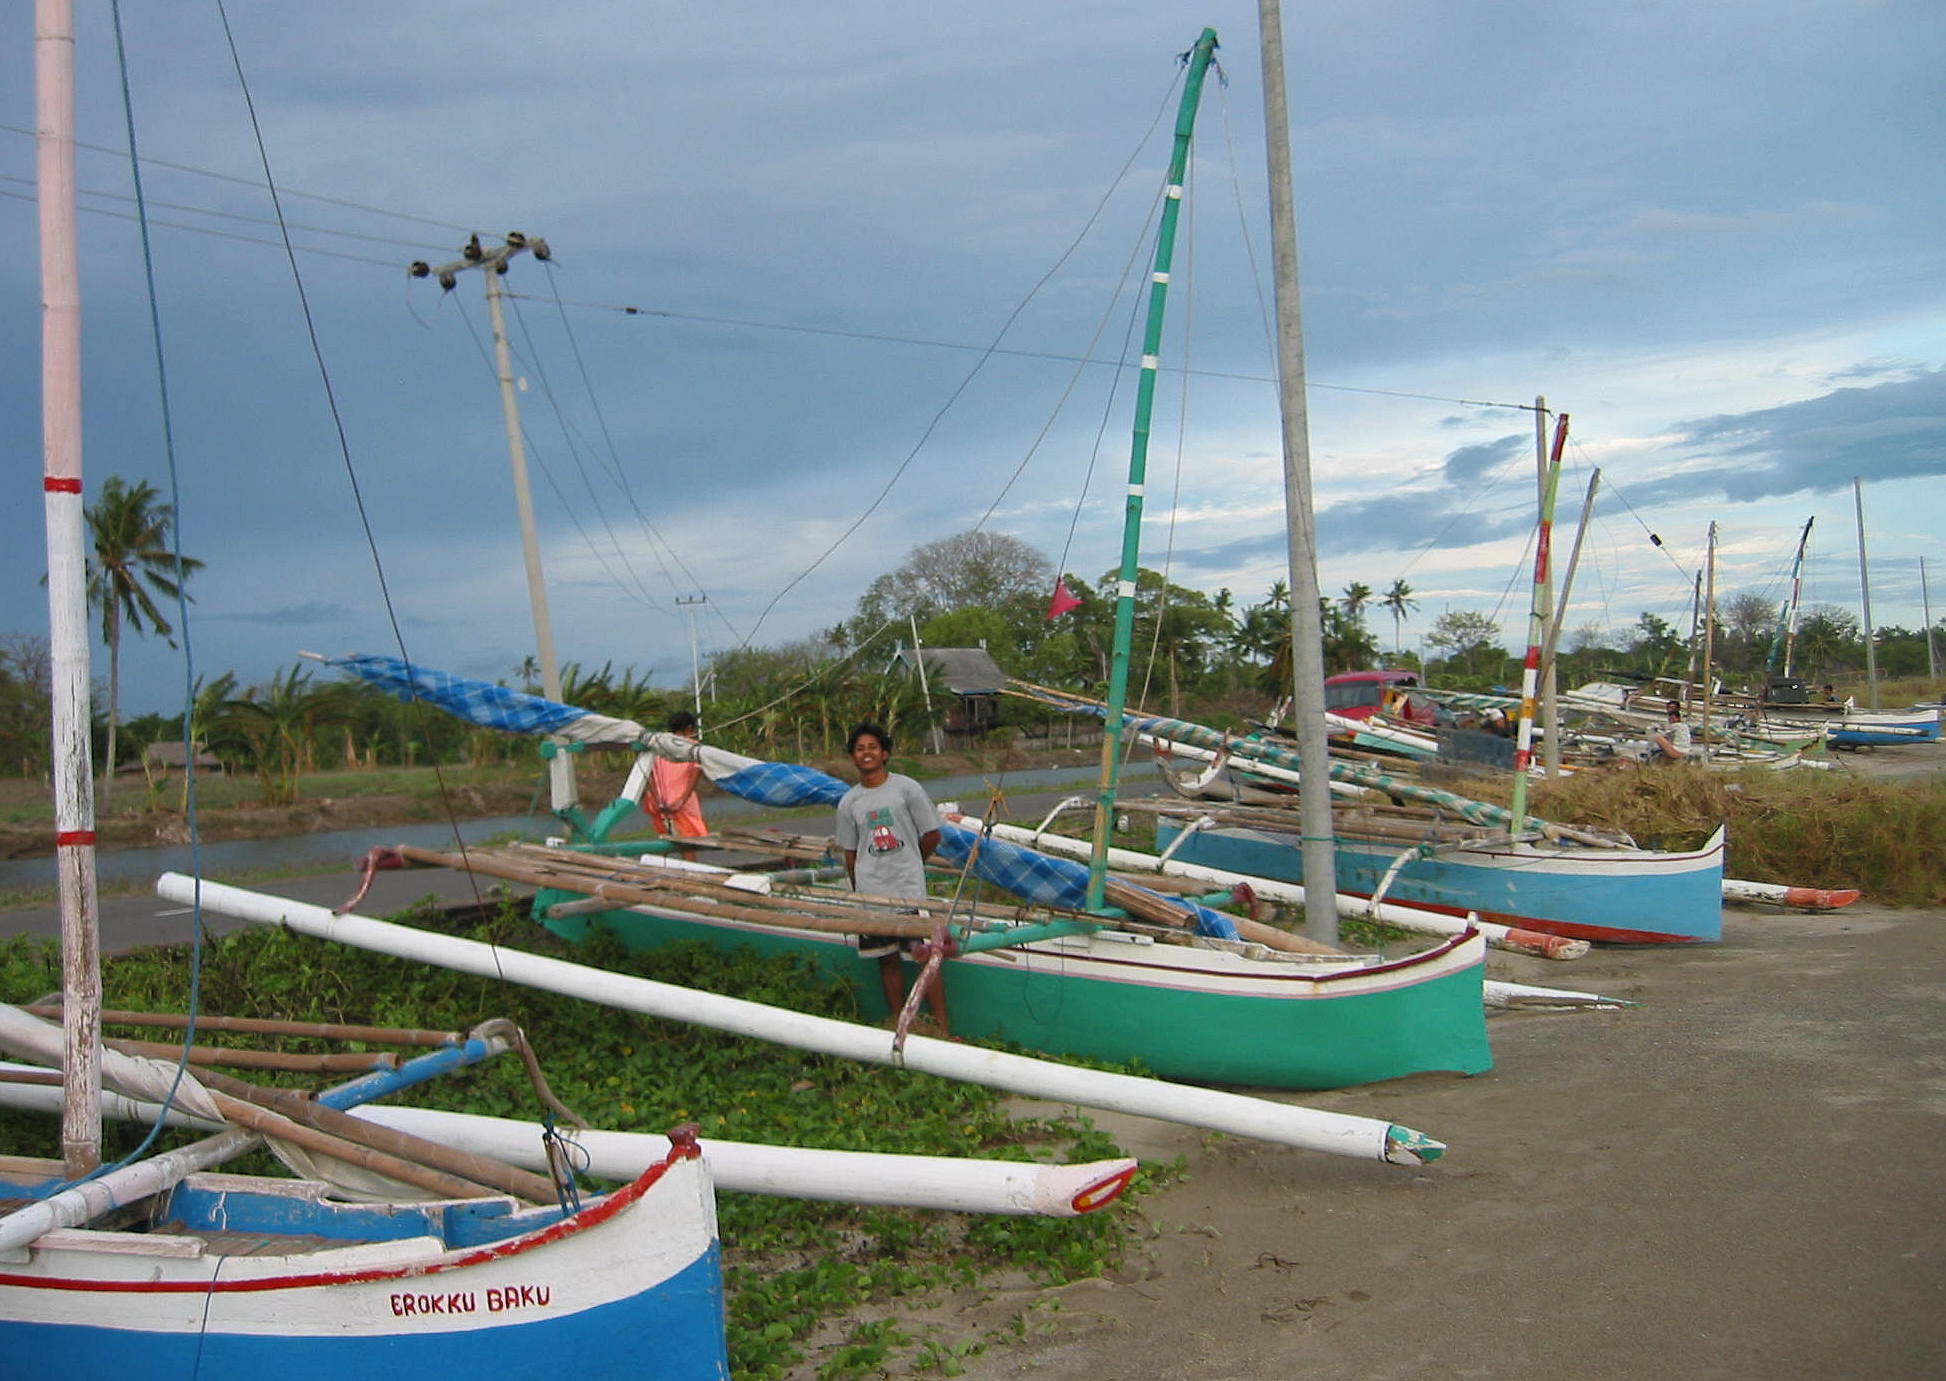 Sulawesi double outrigger fishing canoes. Thousands line the beaches 